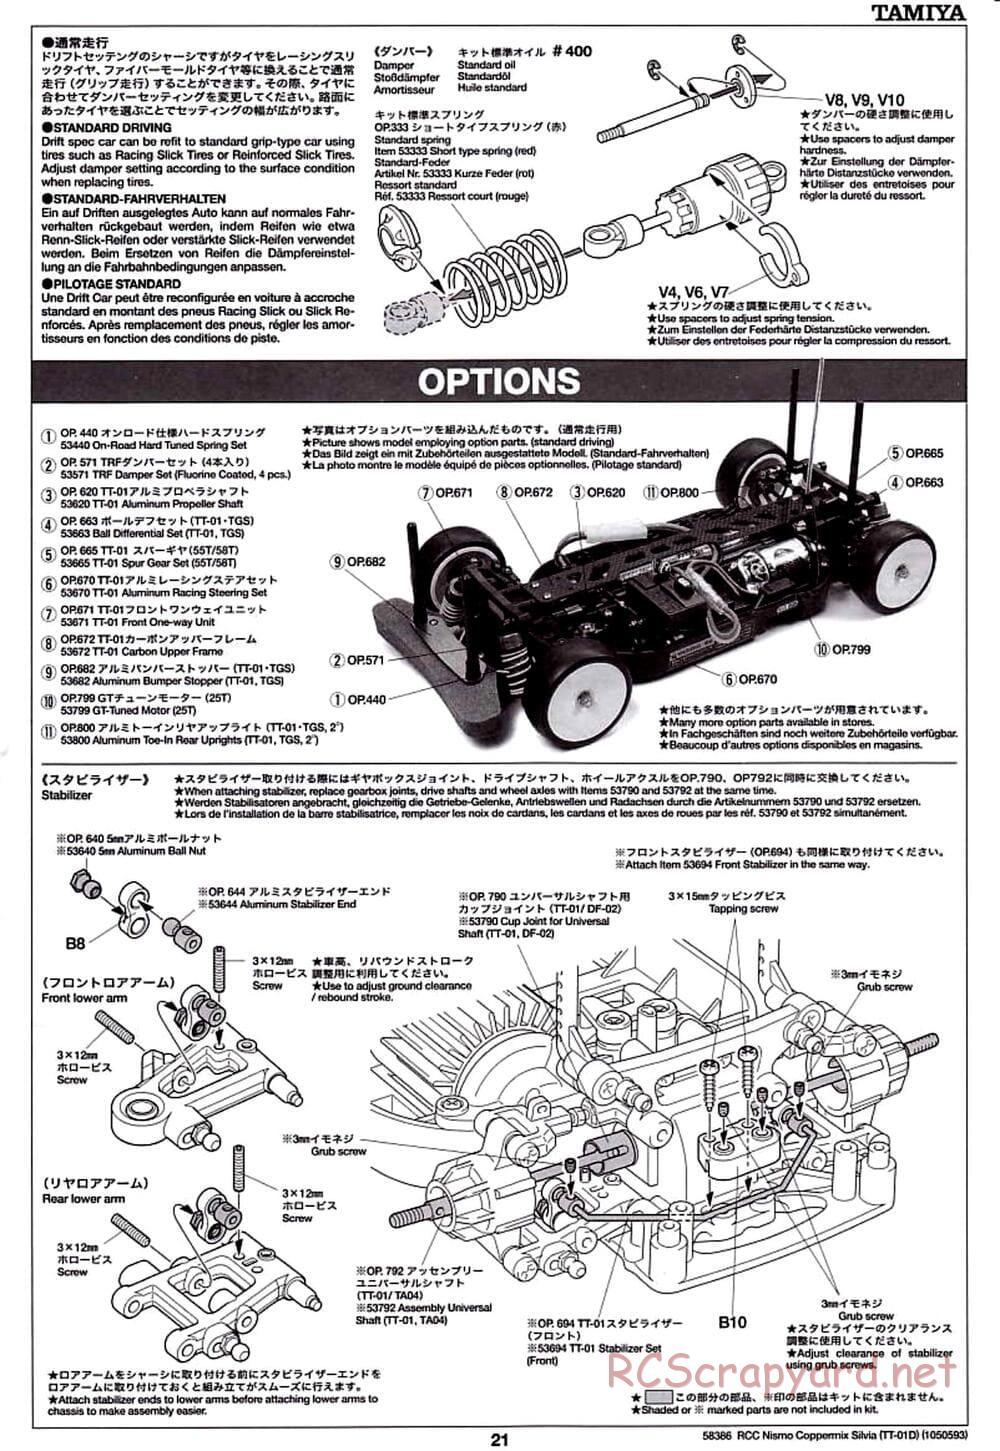 Tamiya - Nismo Coppermix Silvia Drift Spec - TT-01D Chassis - Manual - Page 21